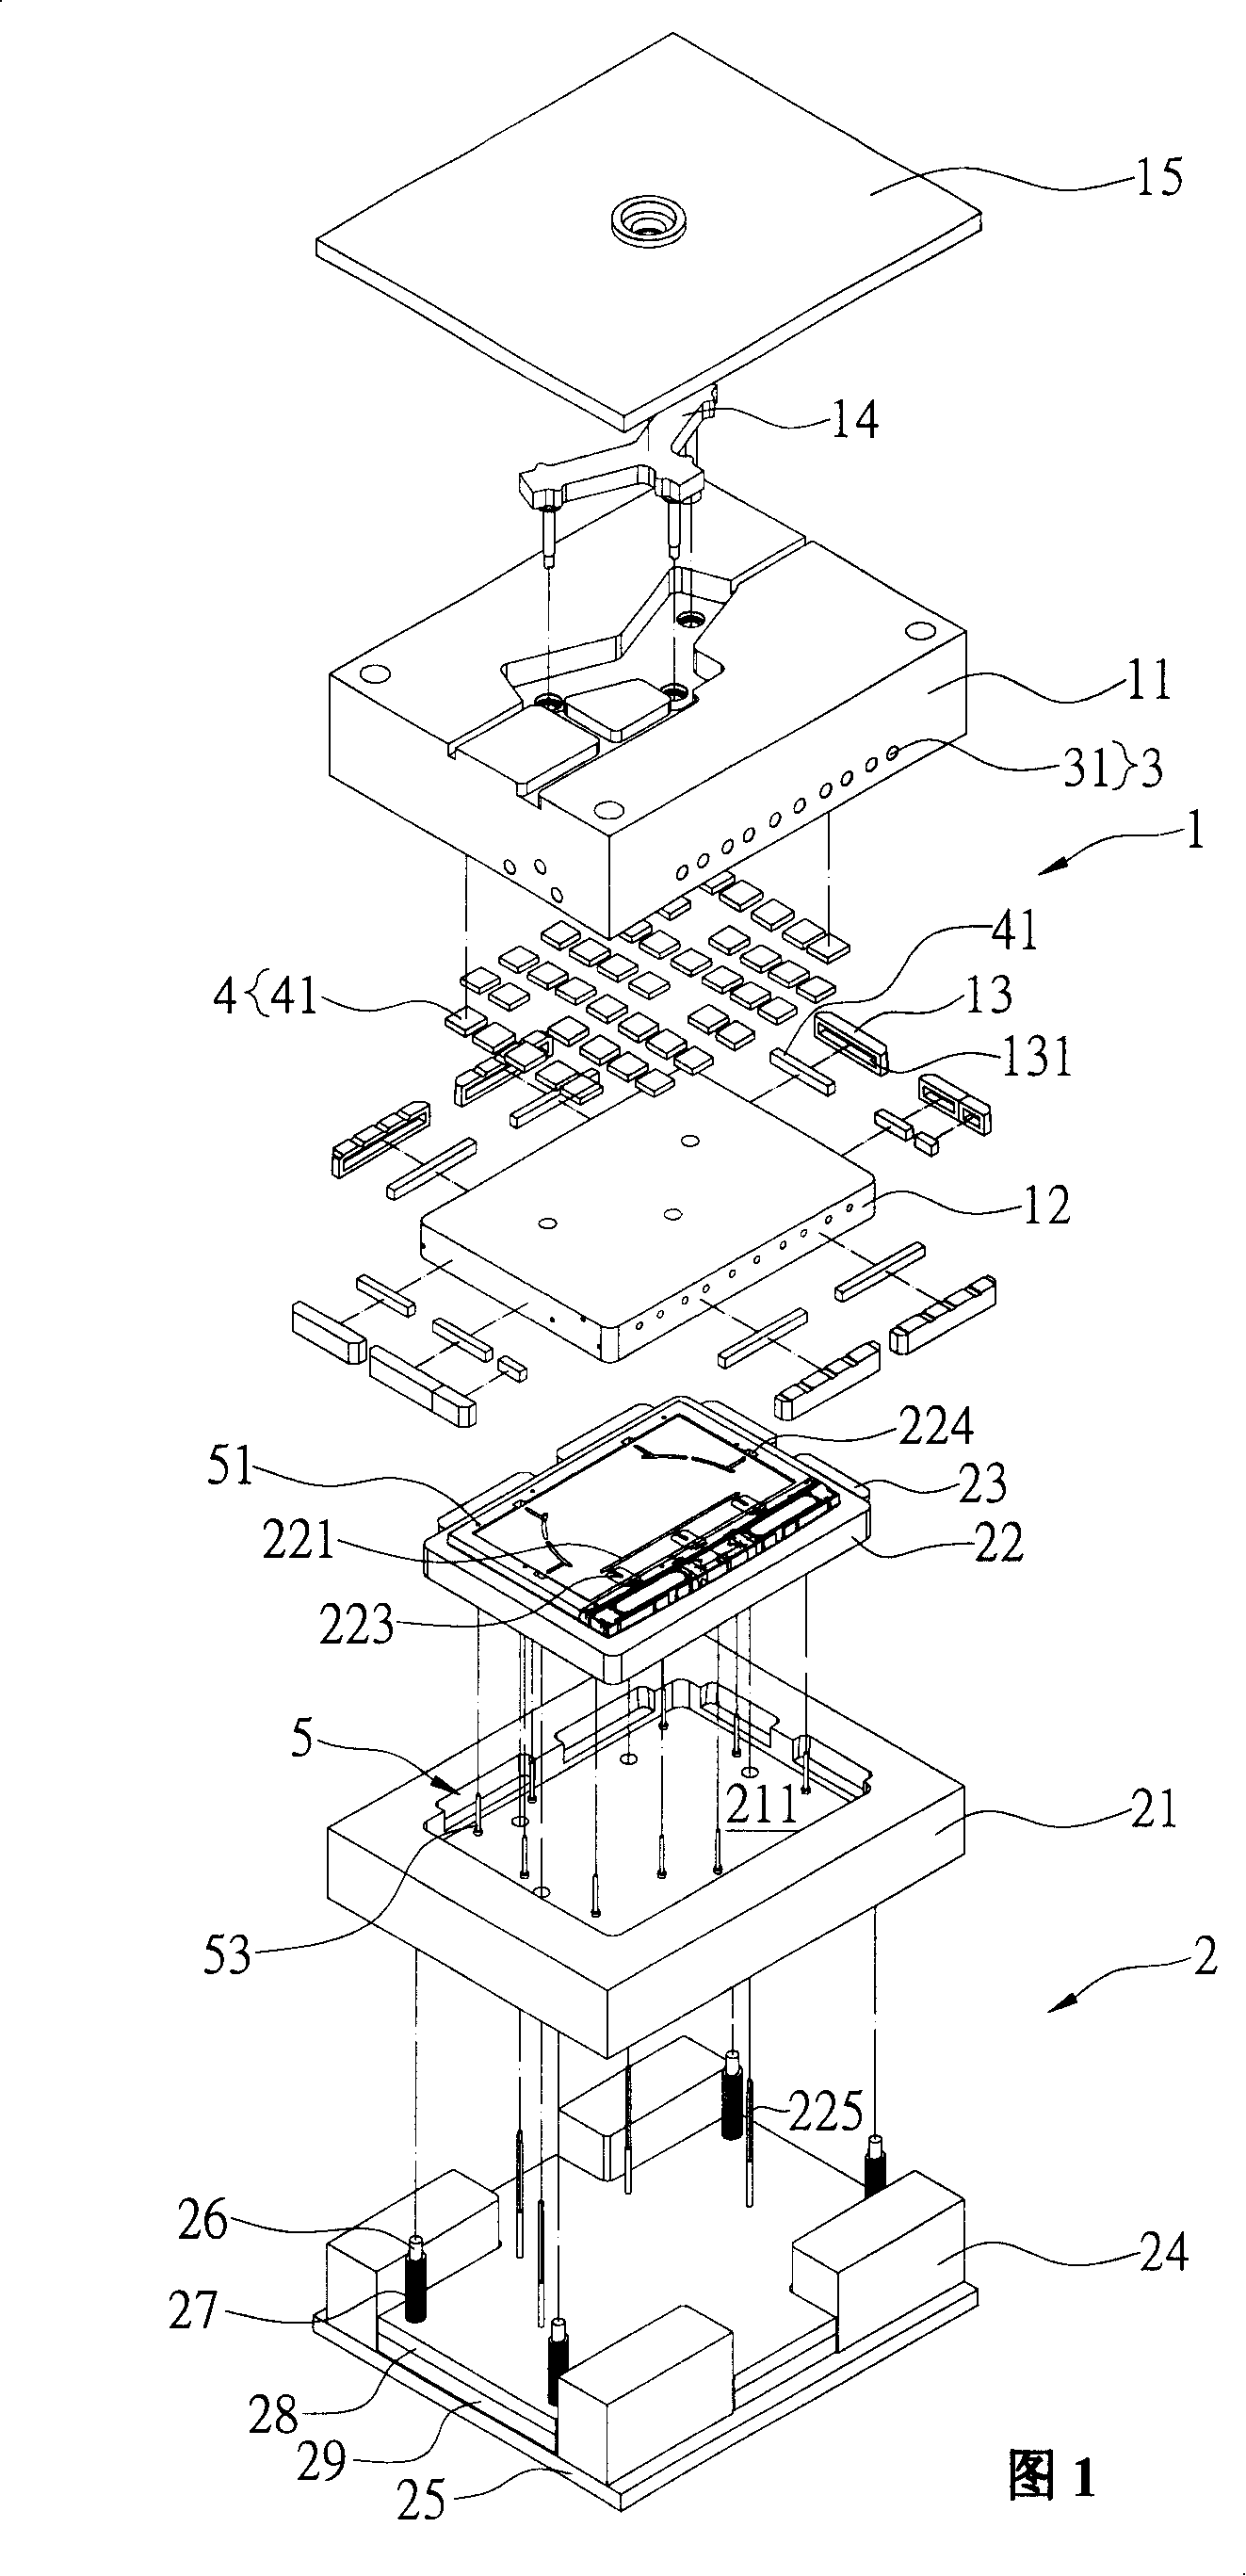 Mold structure and ejection shaping method